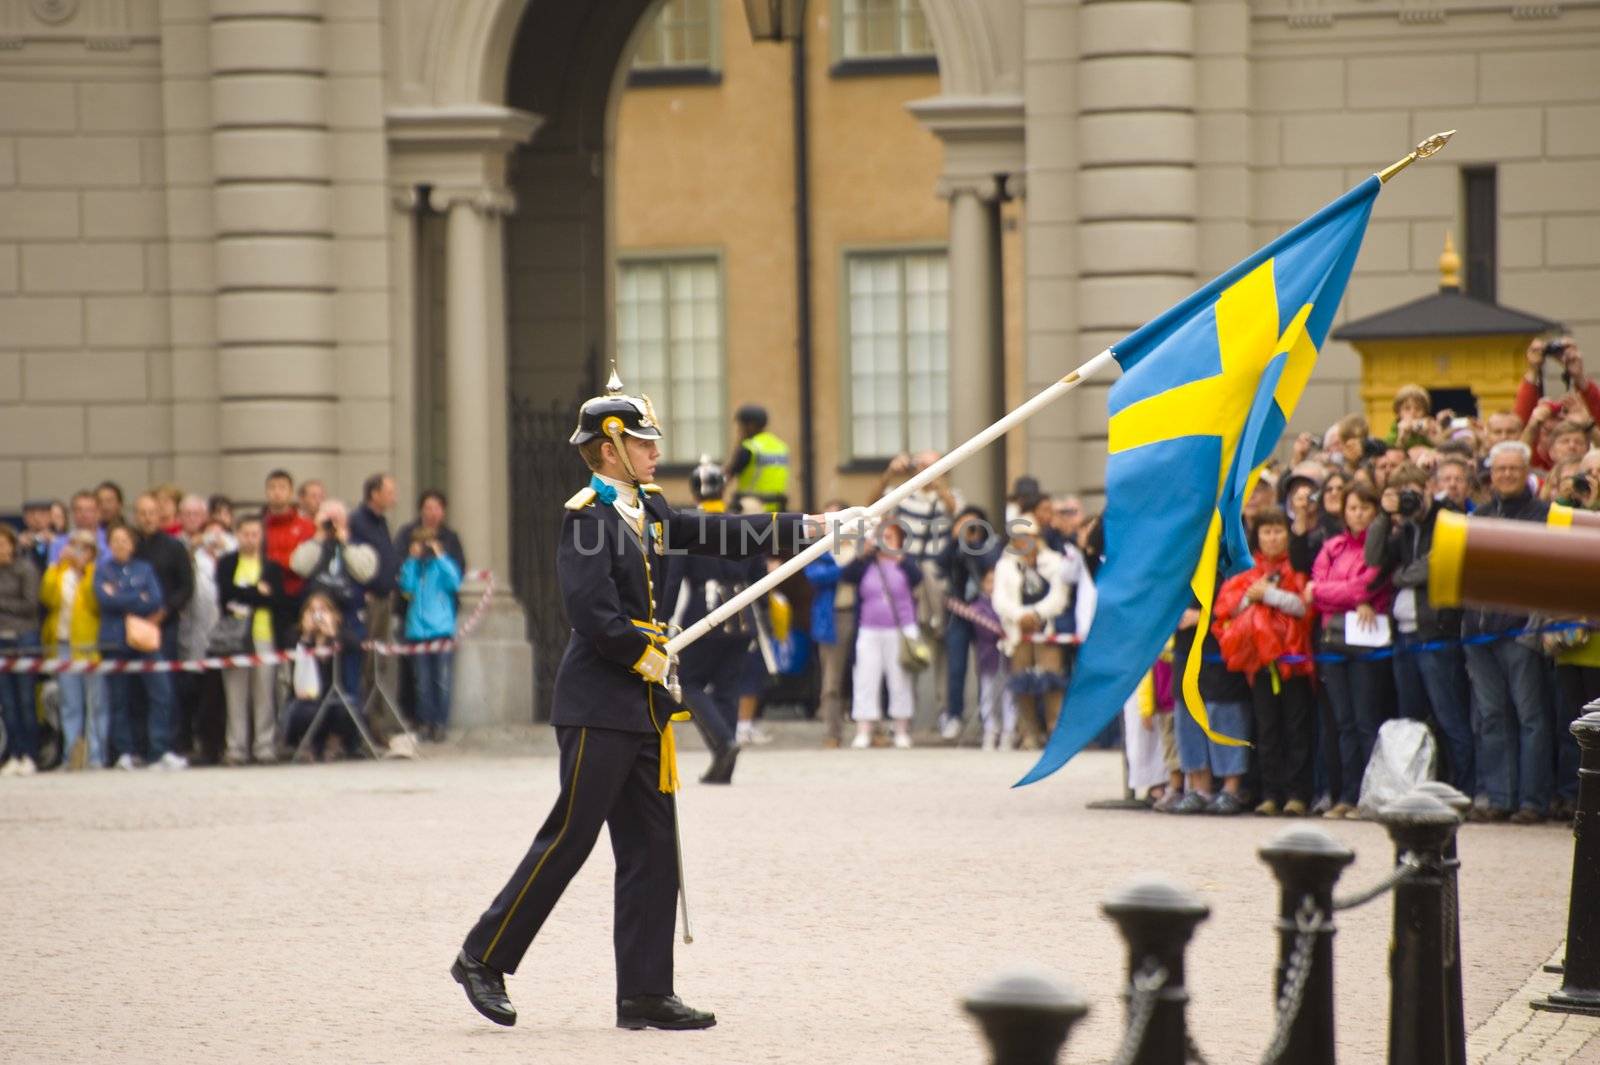 Sweden Royal guards by Alenmax